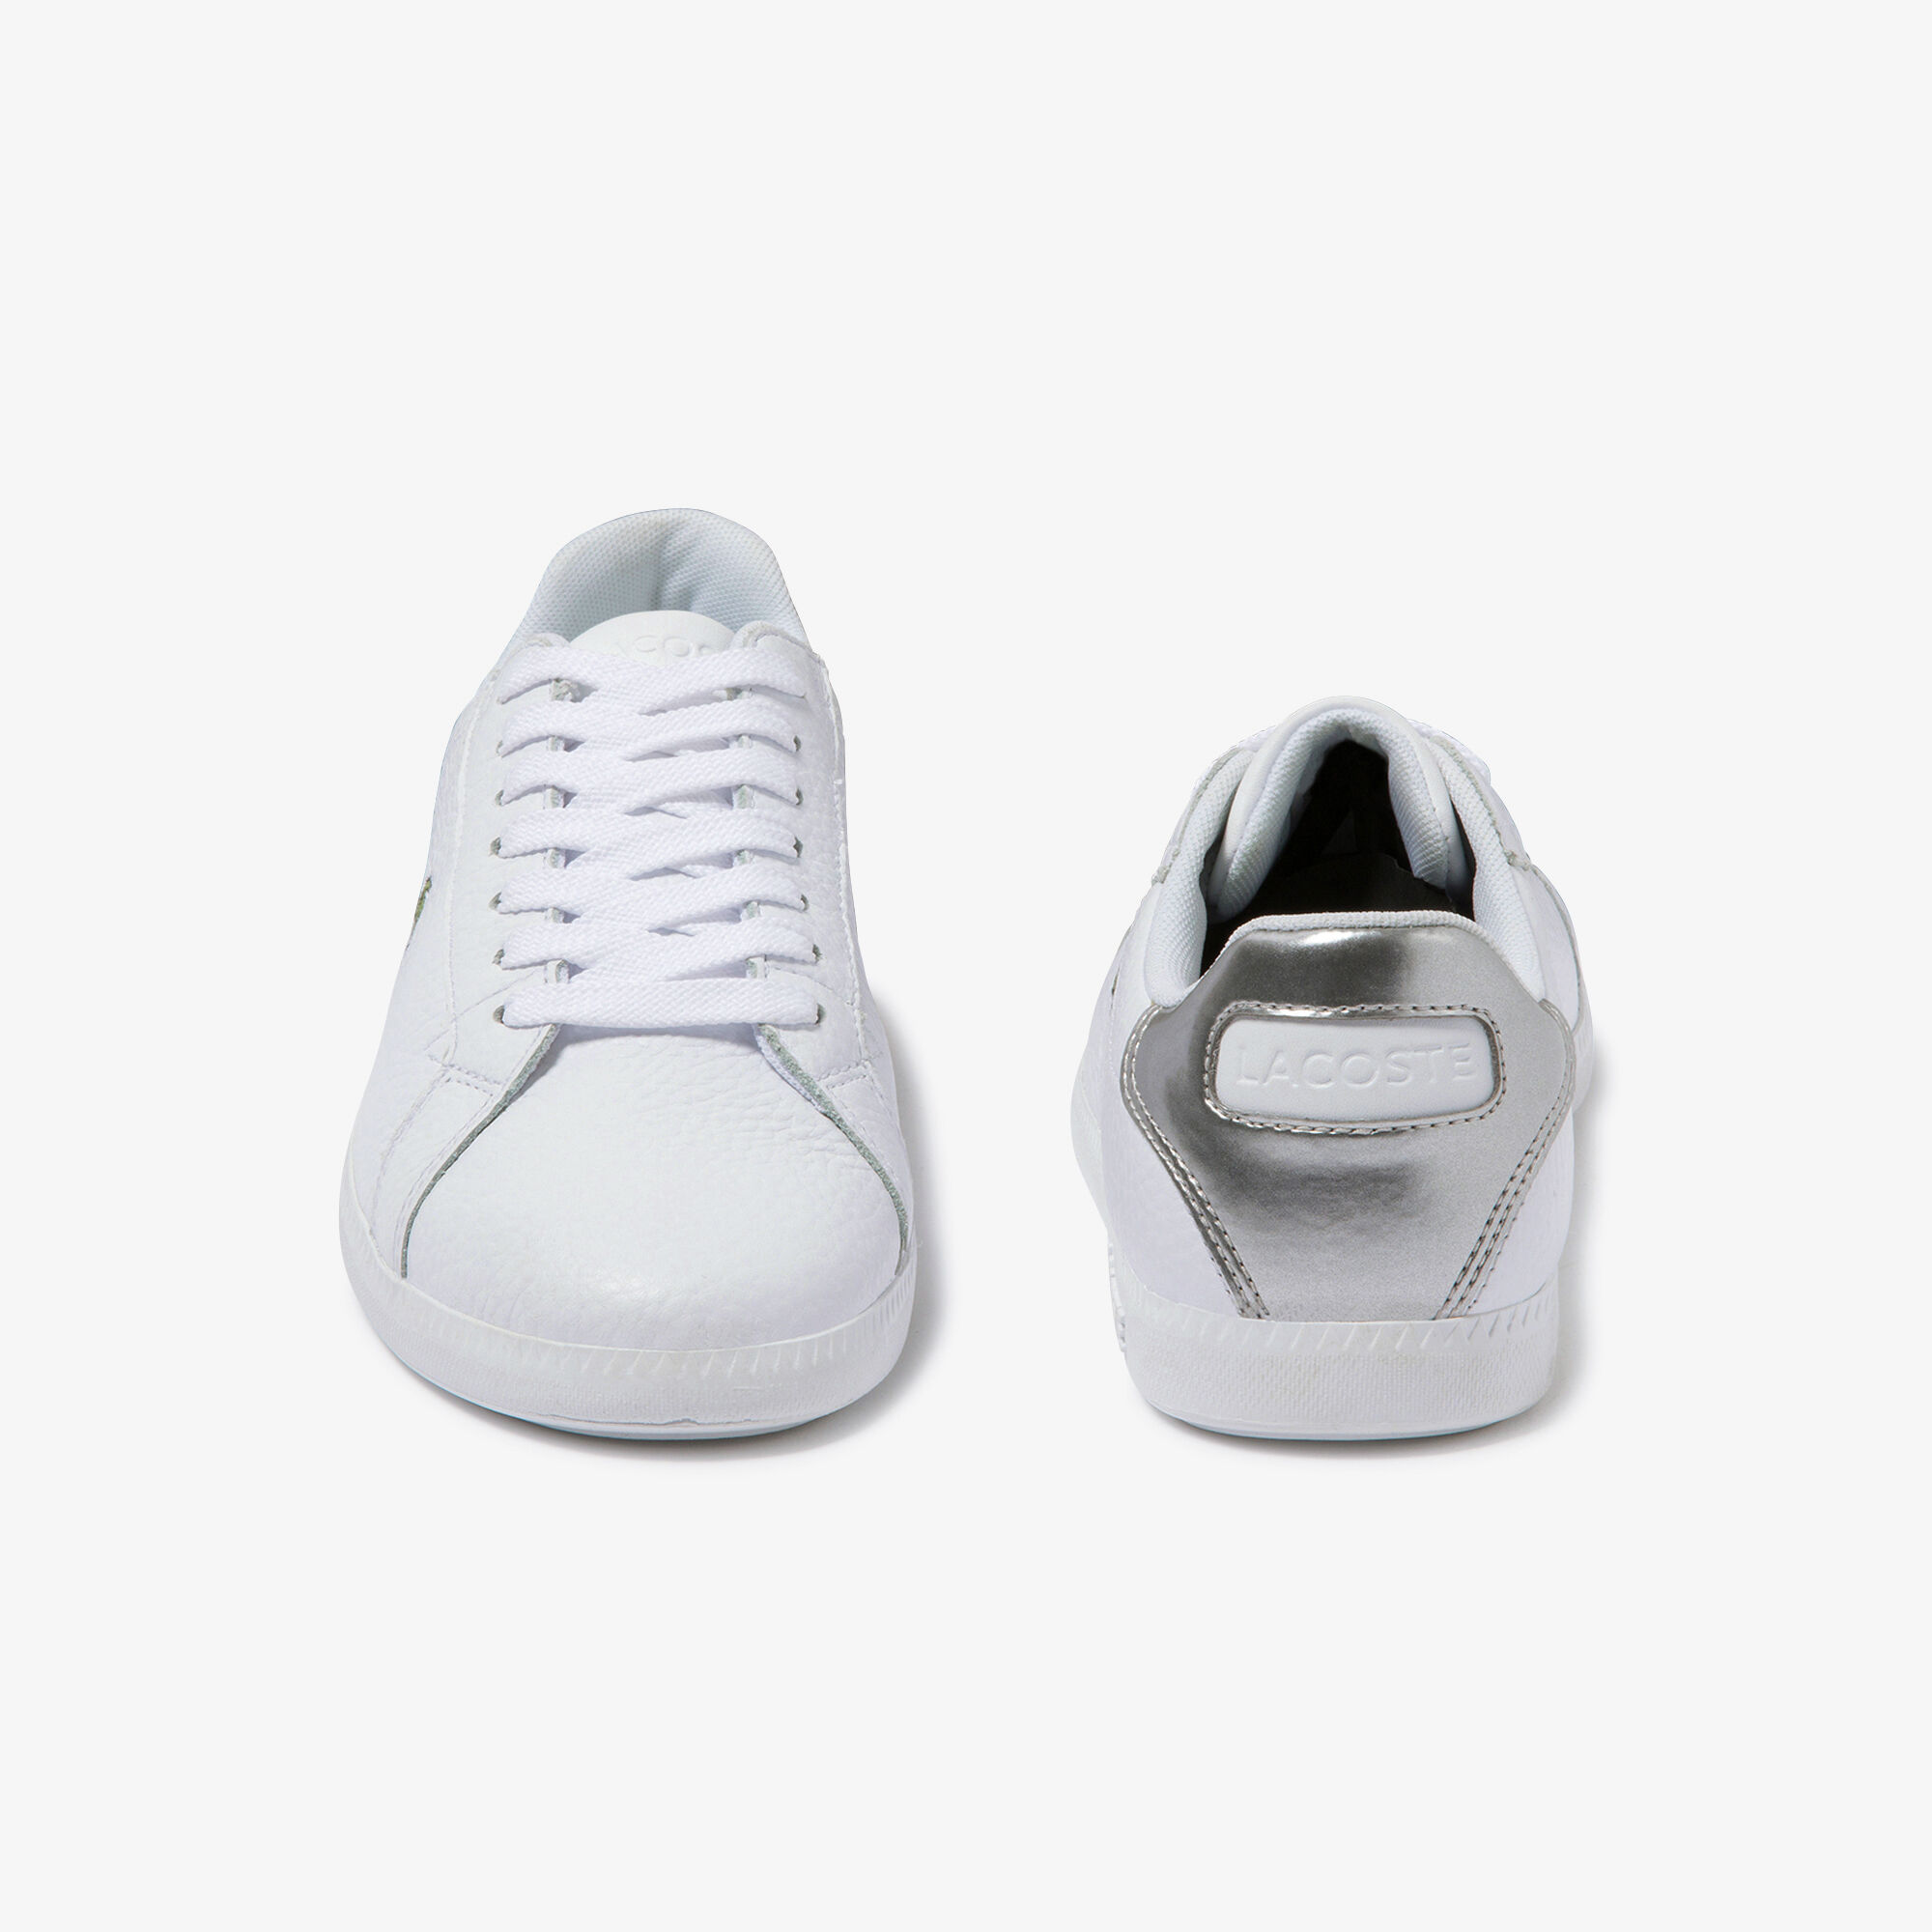 Women's Graduate Leather Trainers